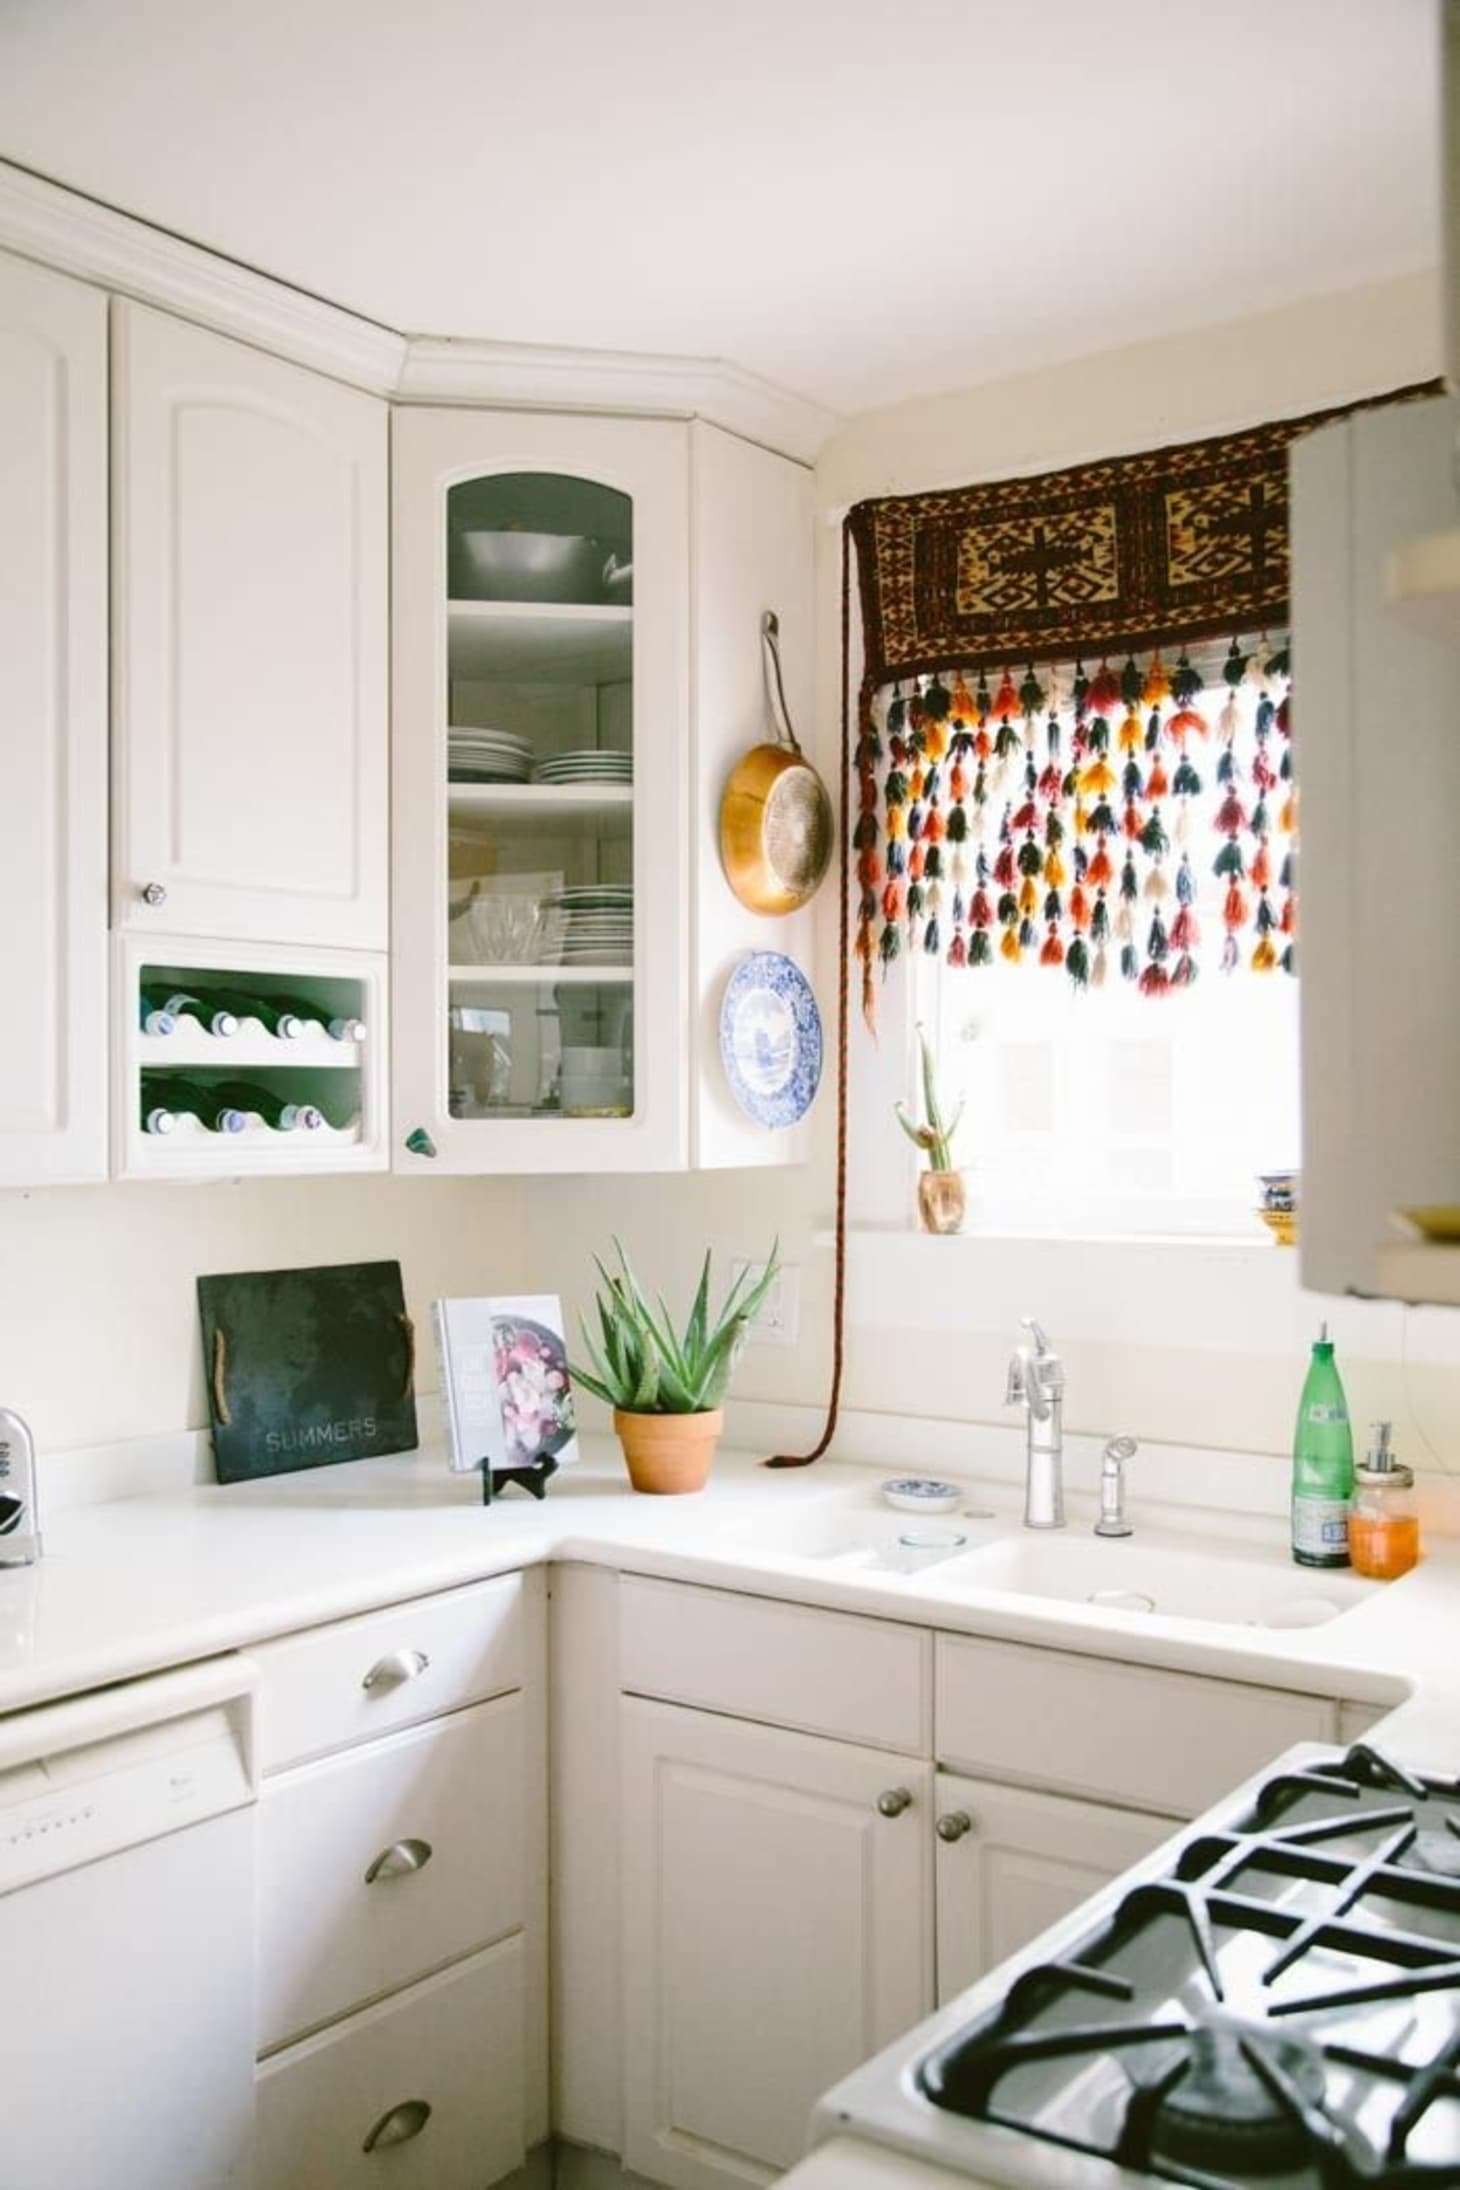 Kitchen Sink Window Decorating Ideas | Apartment Therapy